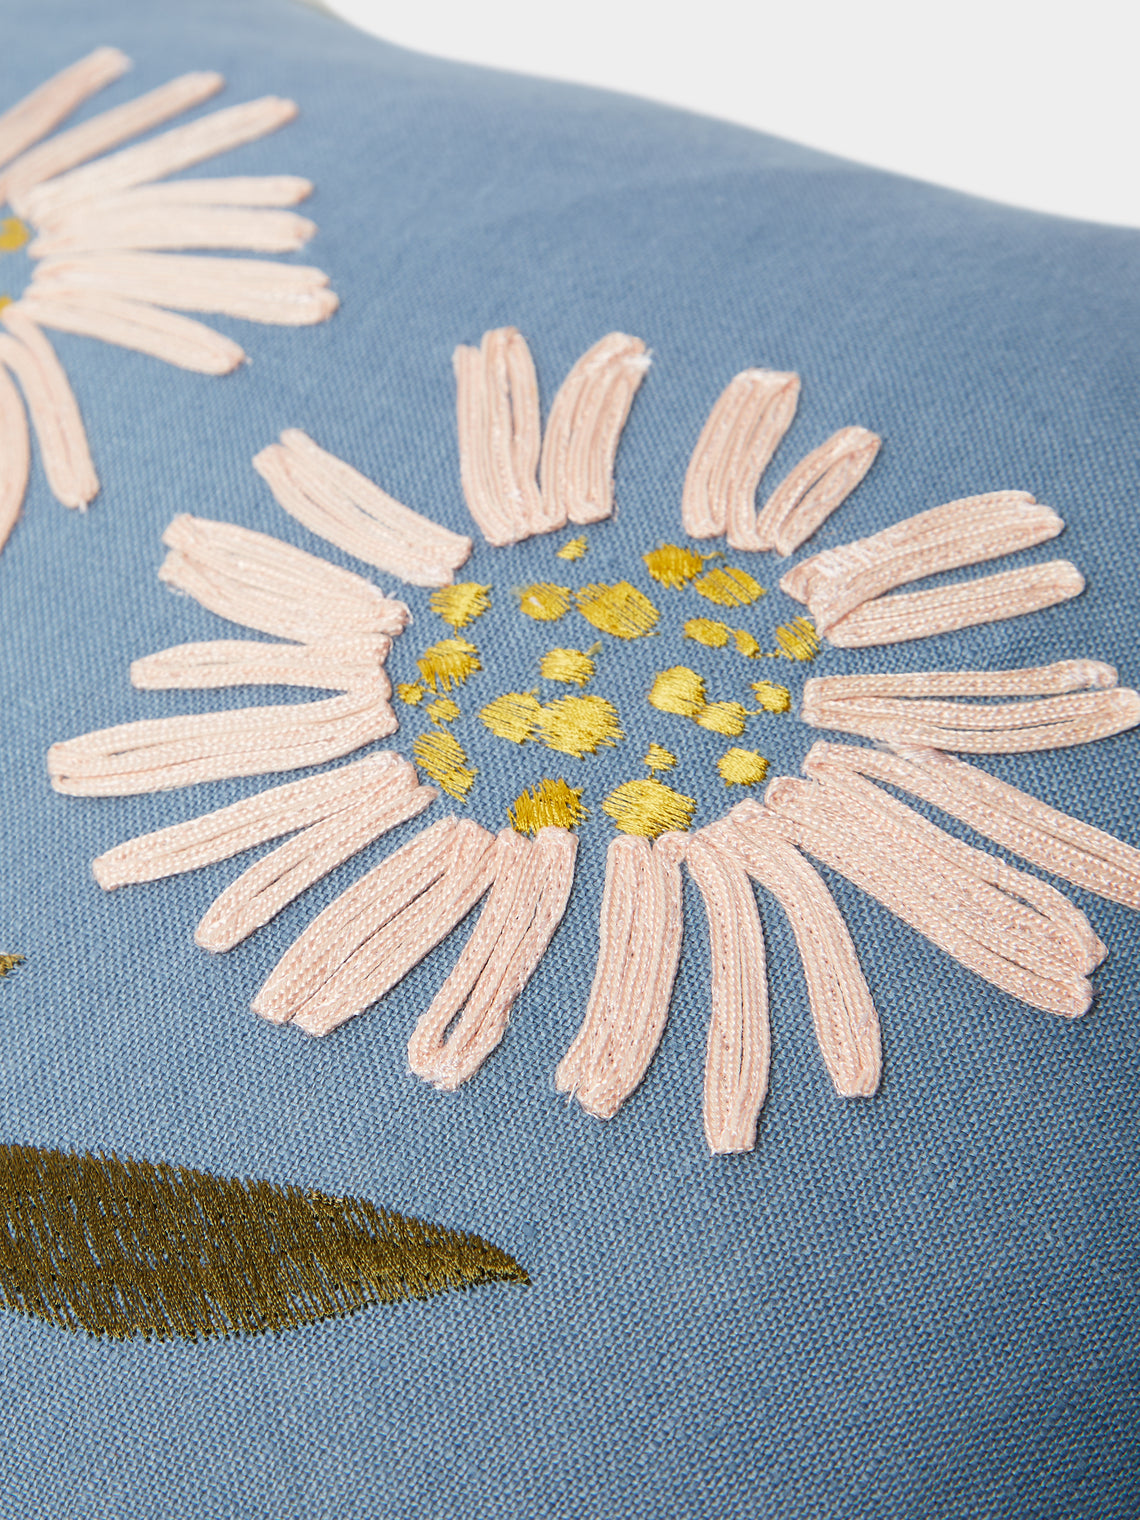 Lora Avedian - Aster Hand-Embroidered Linen Cushion -  - ABASK